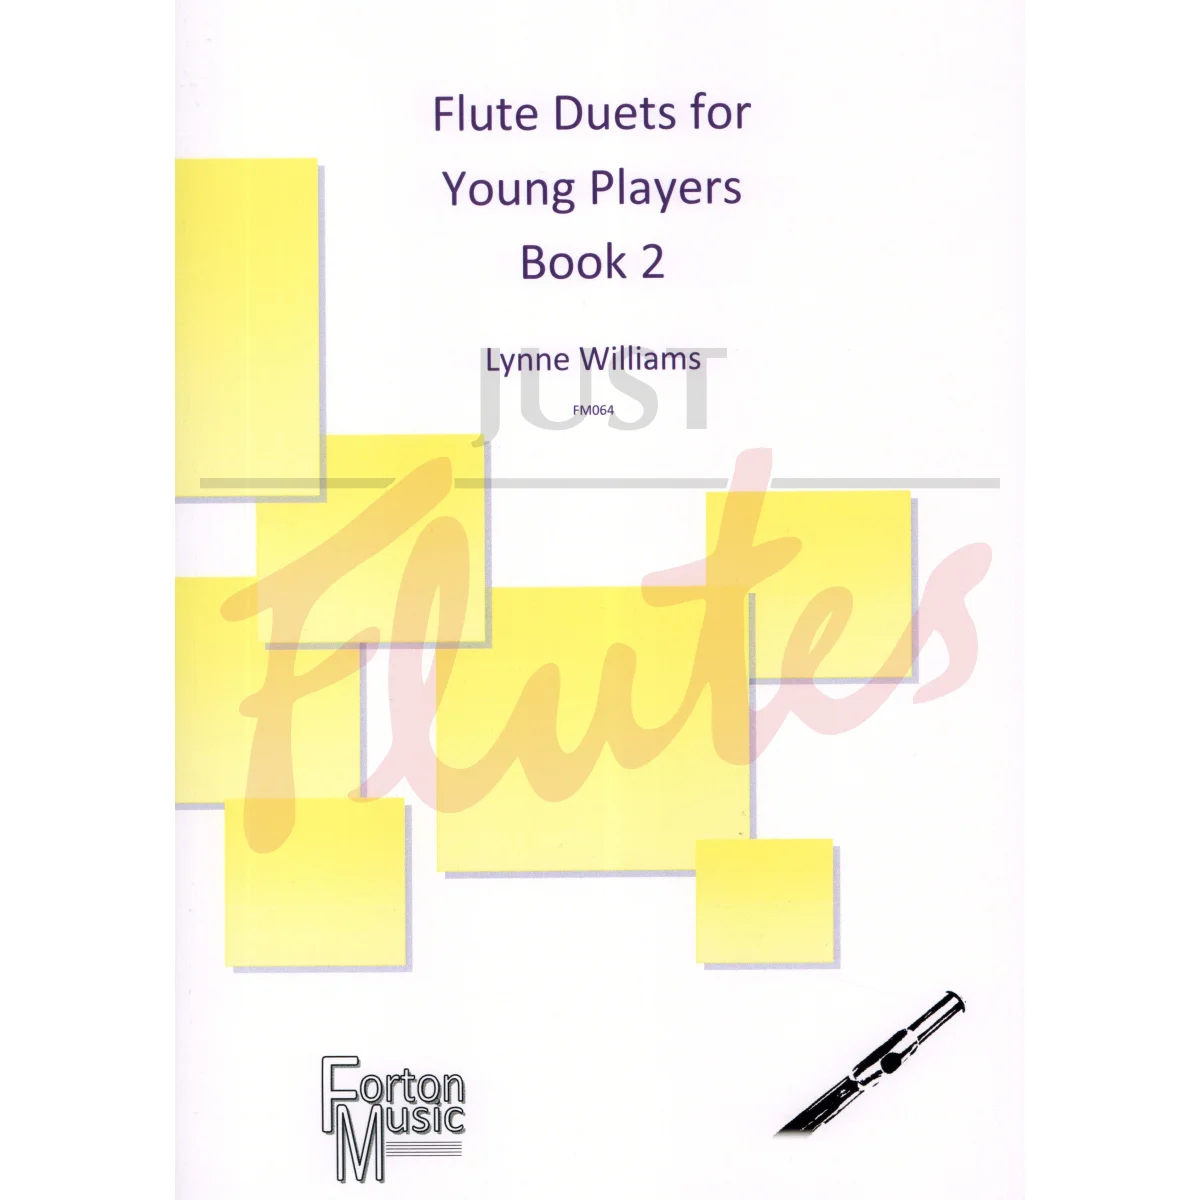 Flute Duets for Young Players Book 2